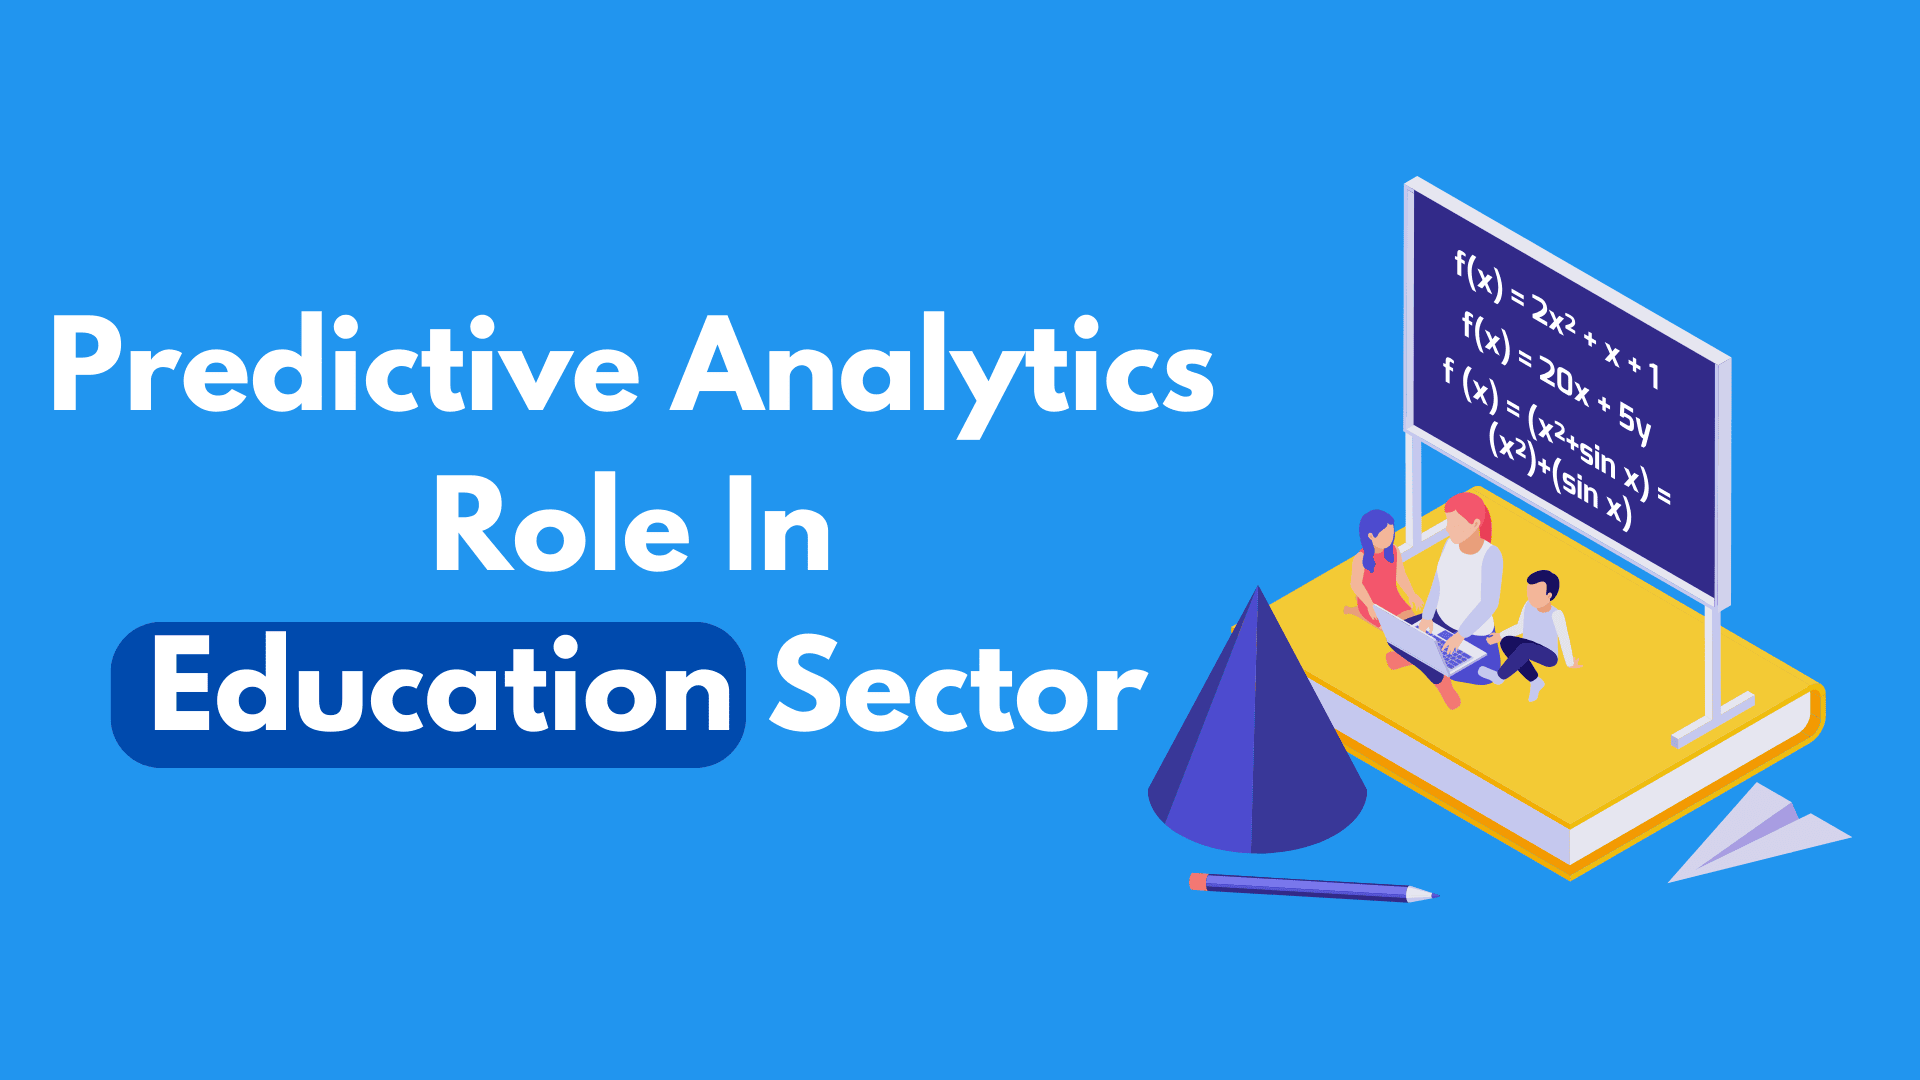 Predictive Analytics Role in the Education Sector